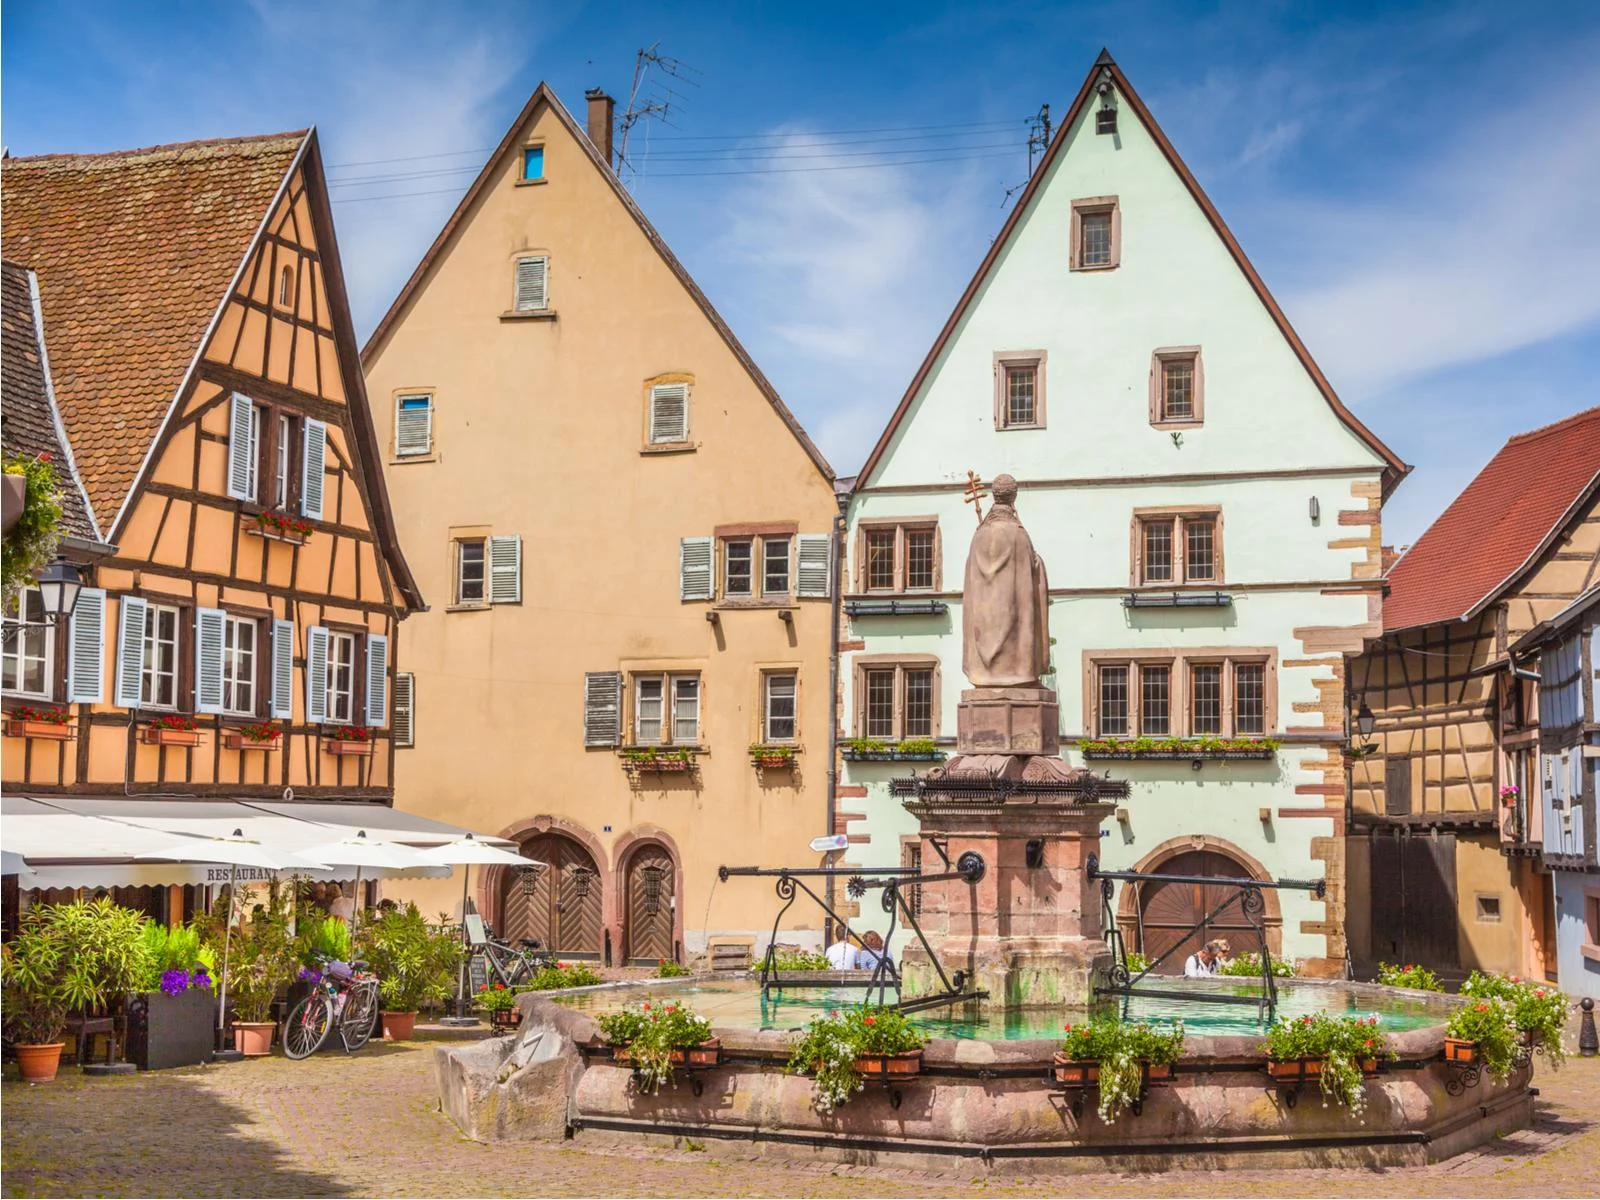 Awesome view of the unique and historic town square in Eguisheim during the best time to visit France